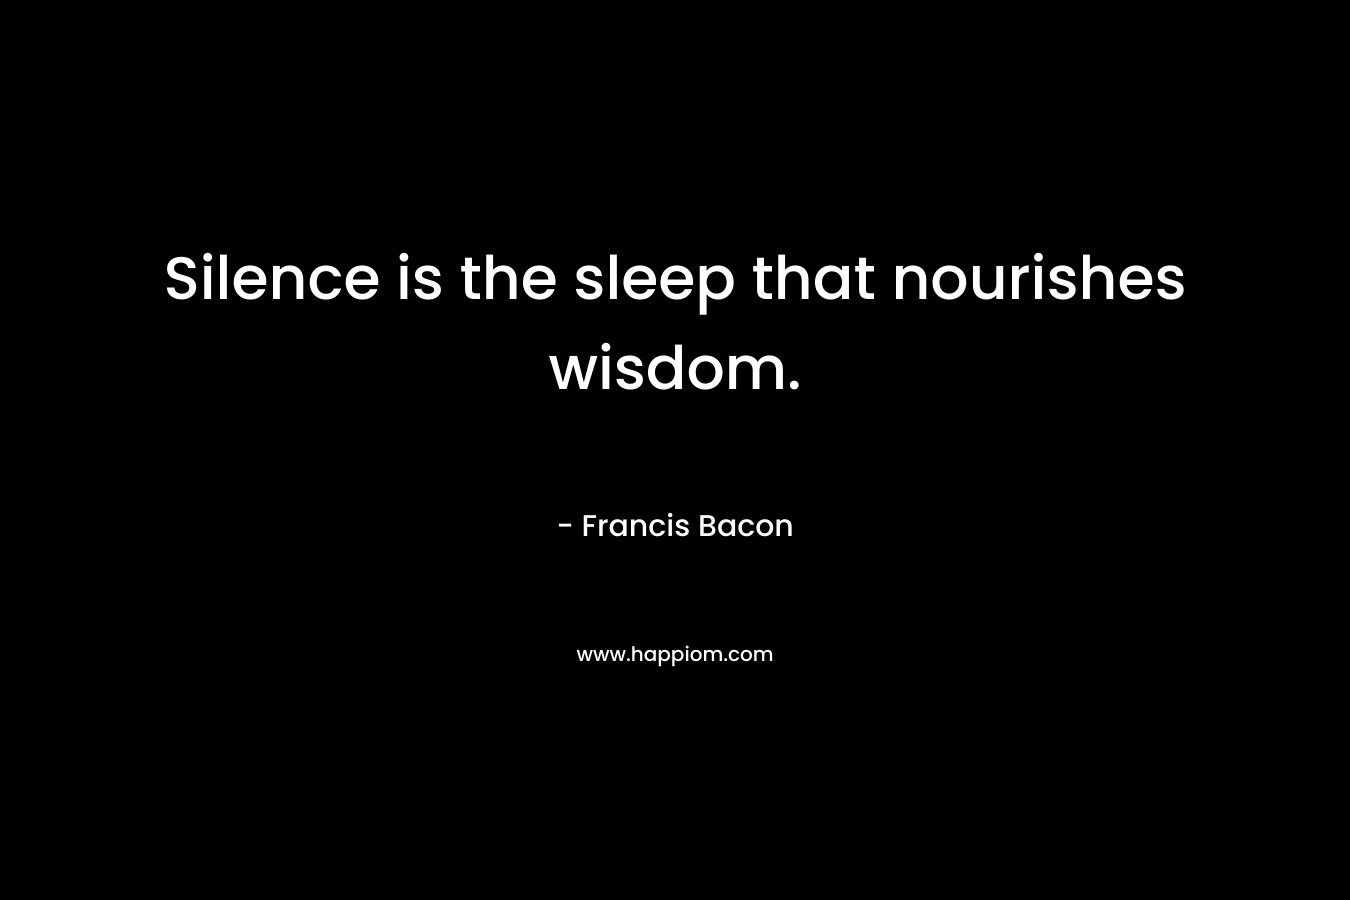 Silence is the sleep that nourishes wisdom.